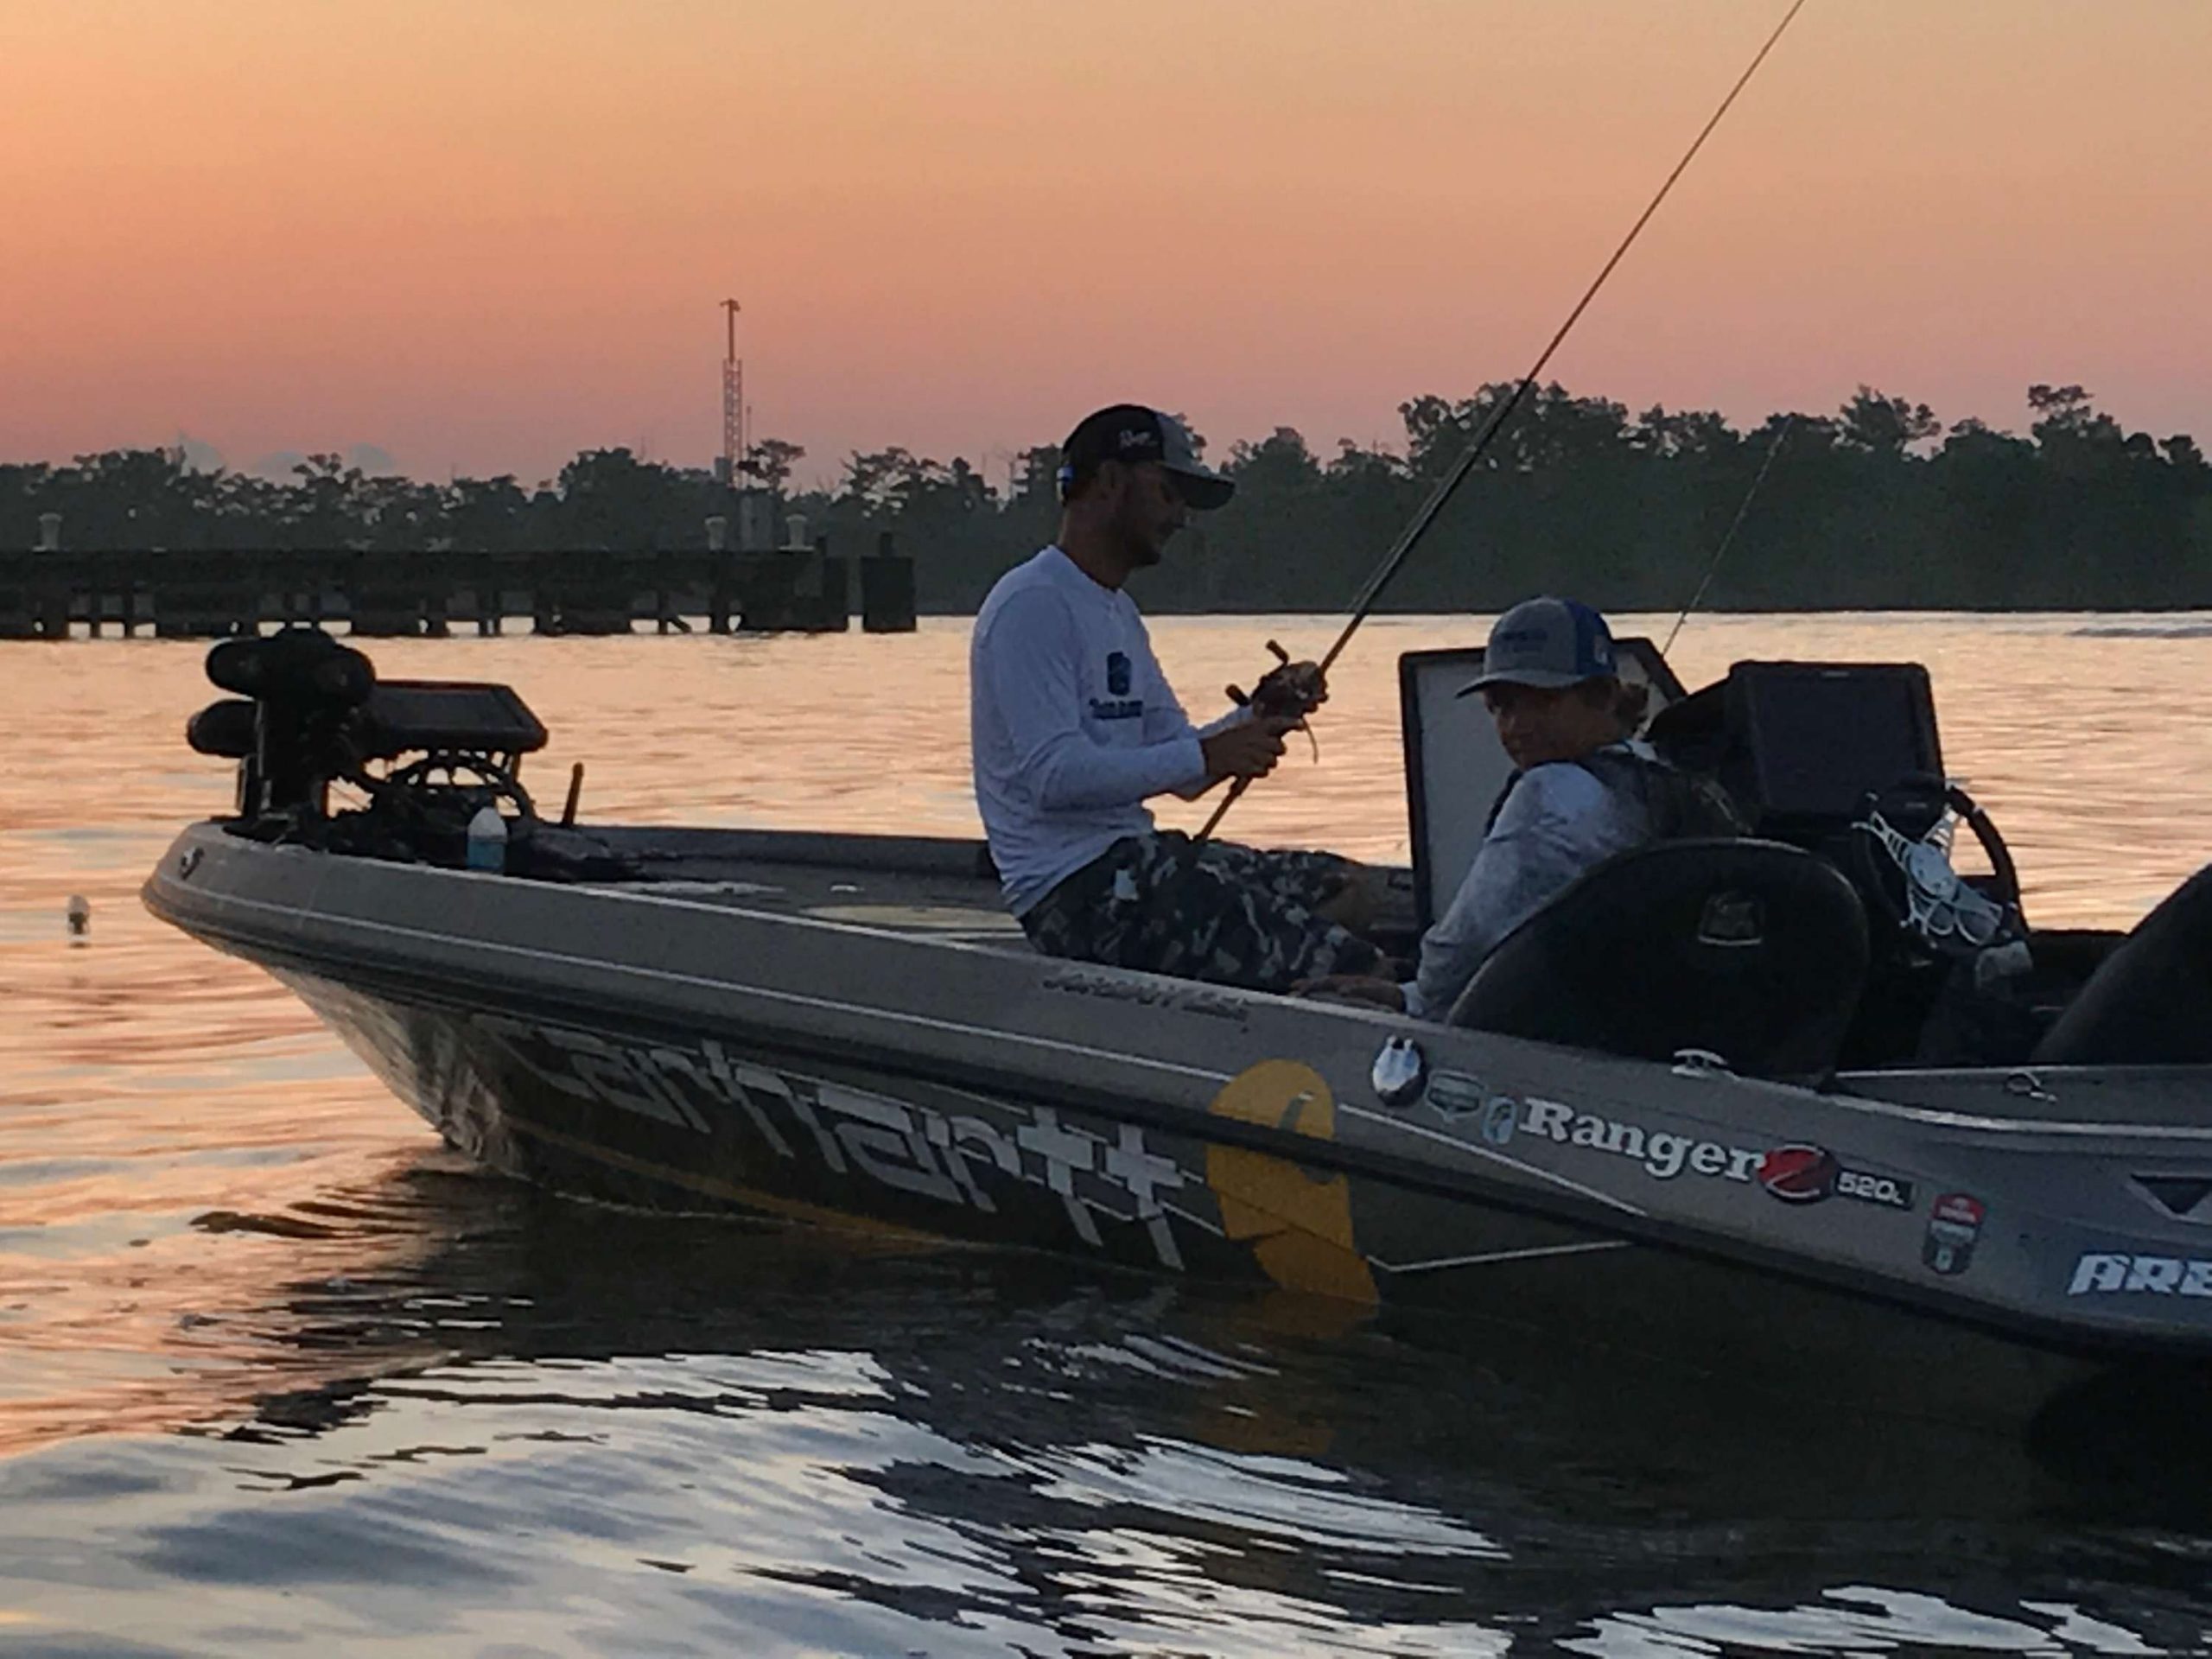 The Classic Champion getting ready to go!!  Sabine River Day 2.

